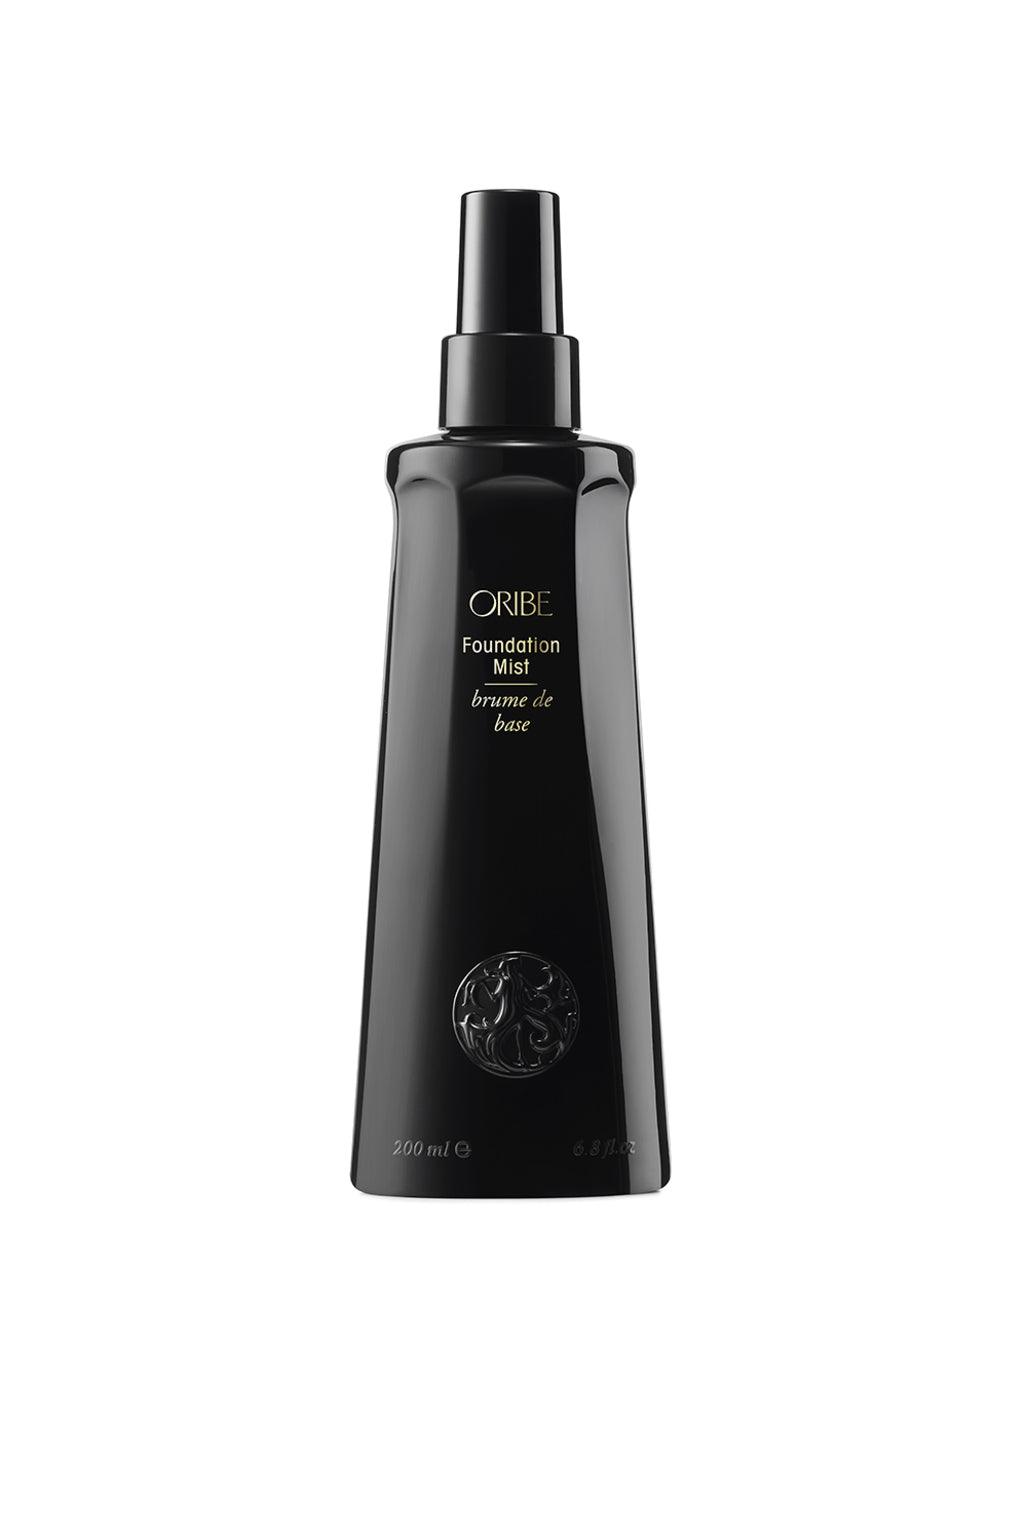 Foundation Mist - The Coloroom 